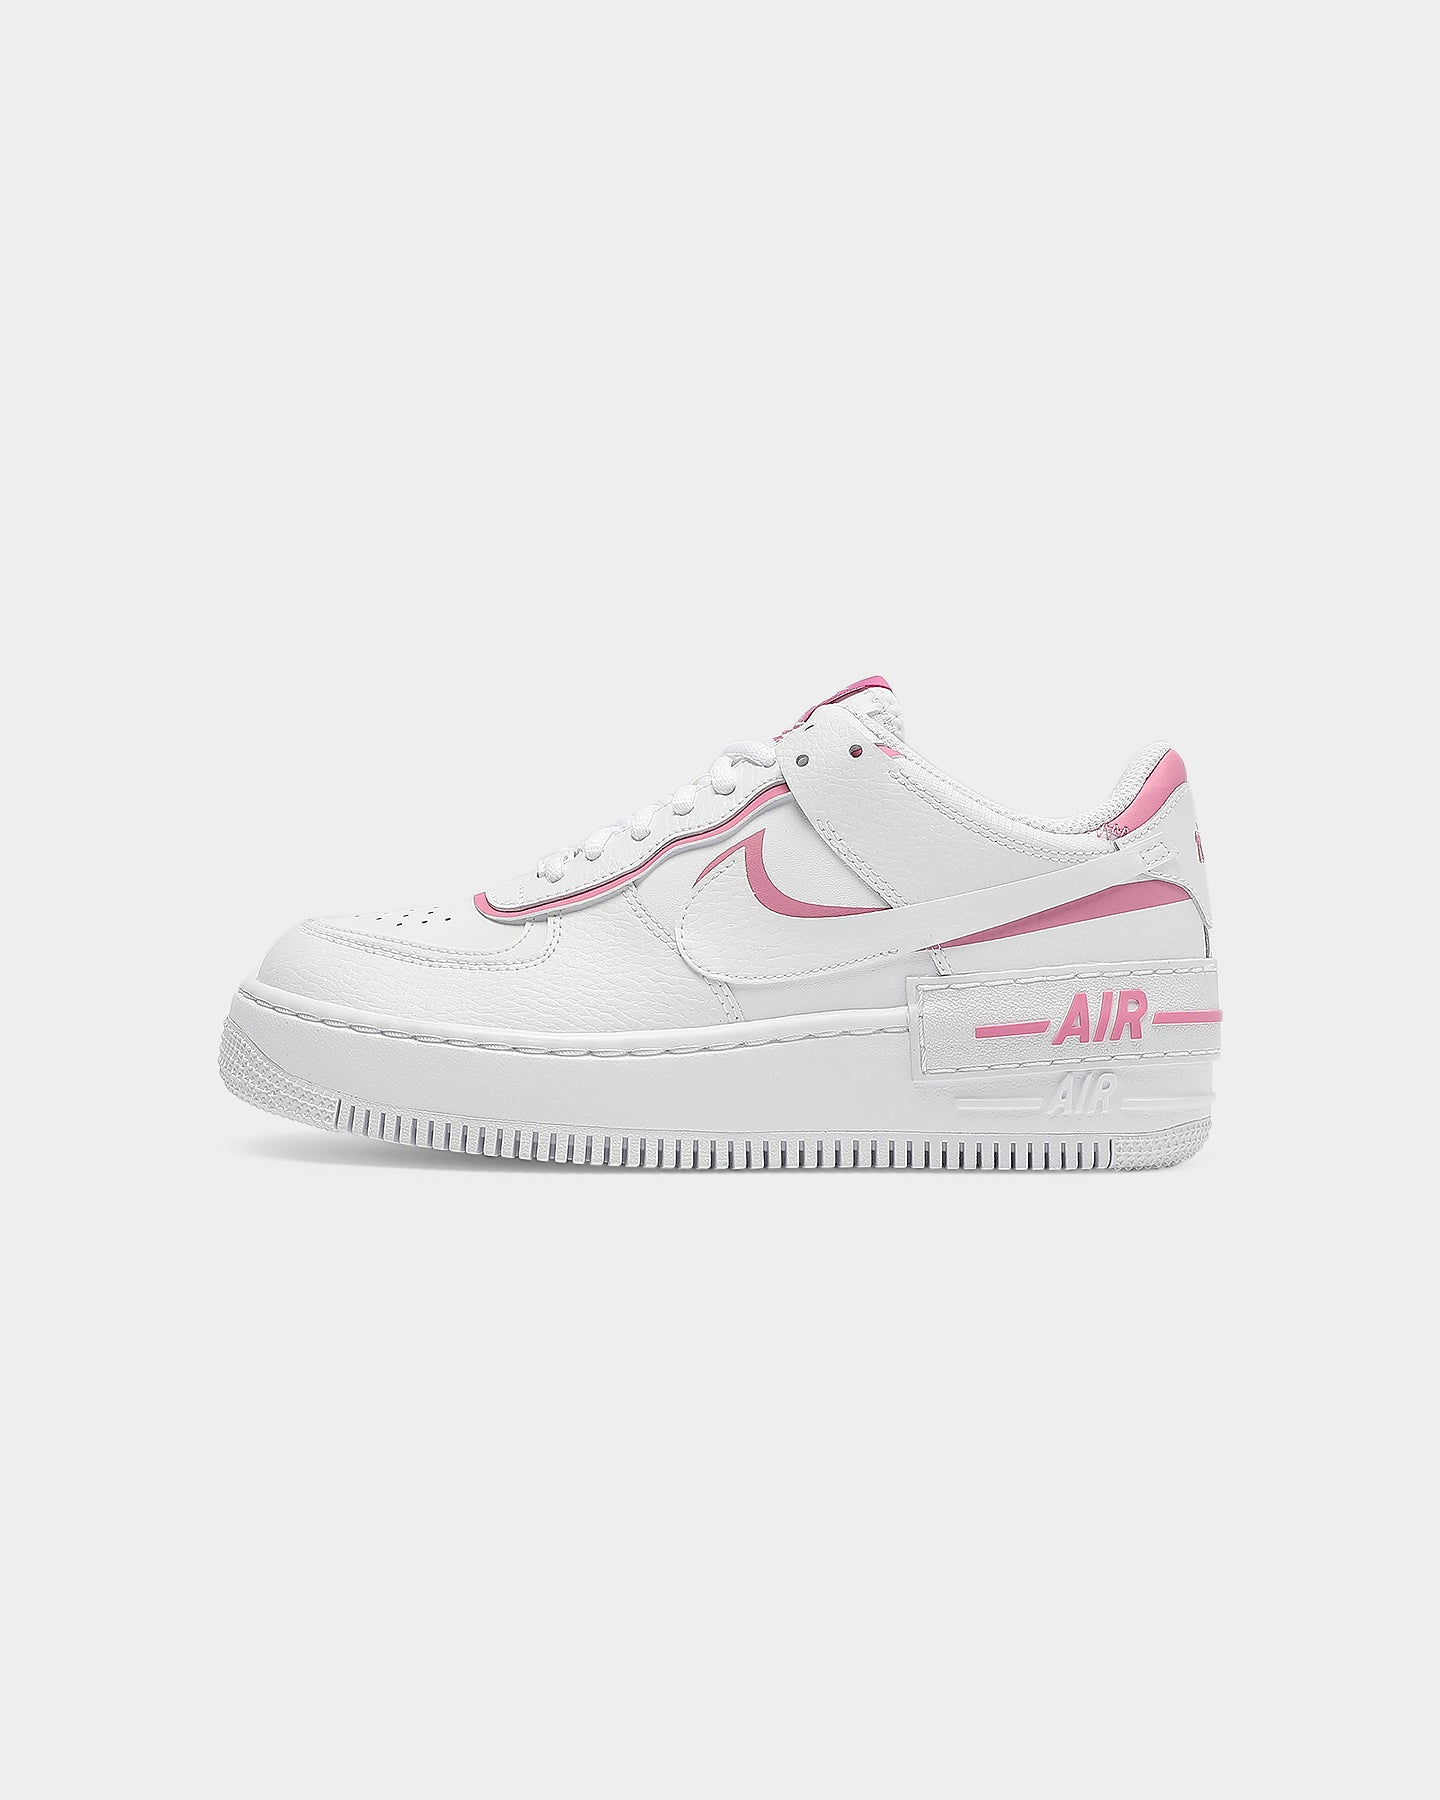 air force 1 pink and blue tick